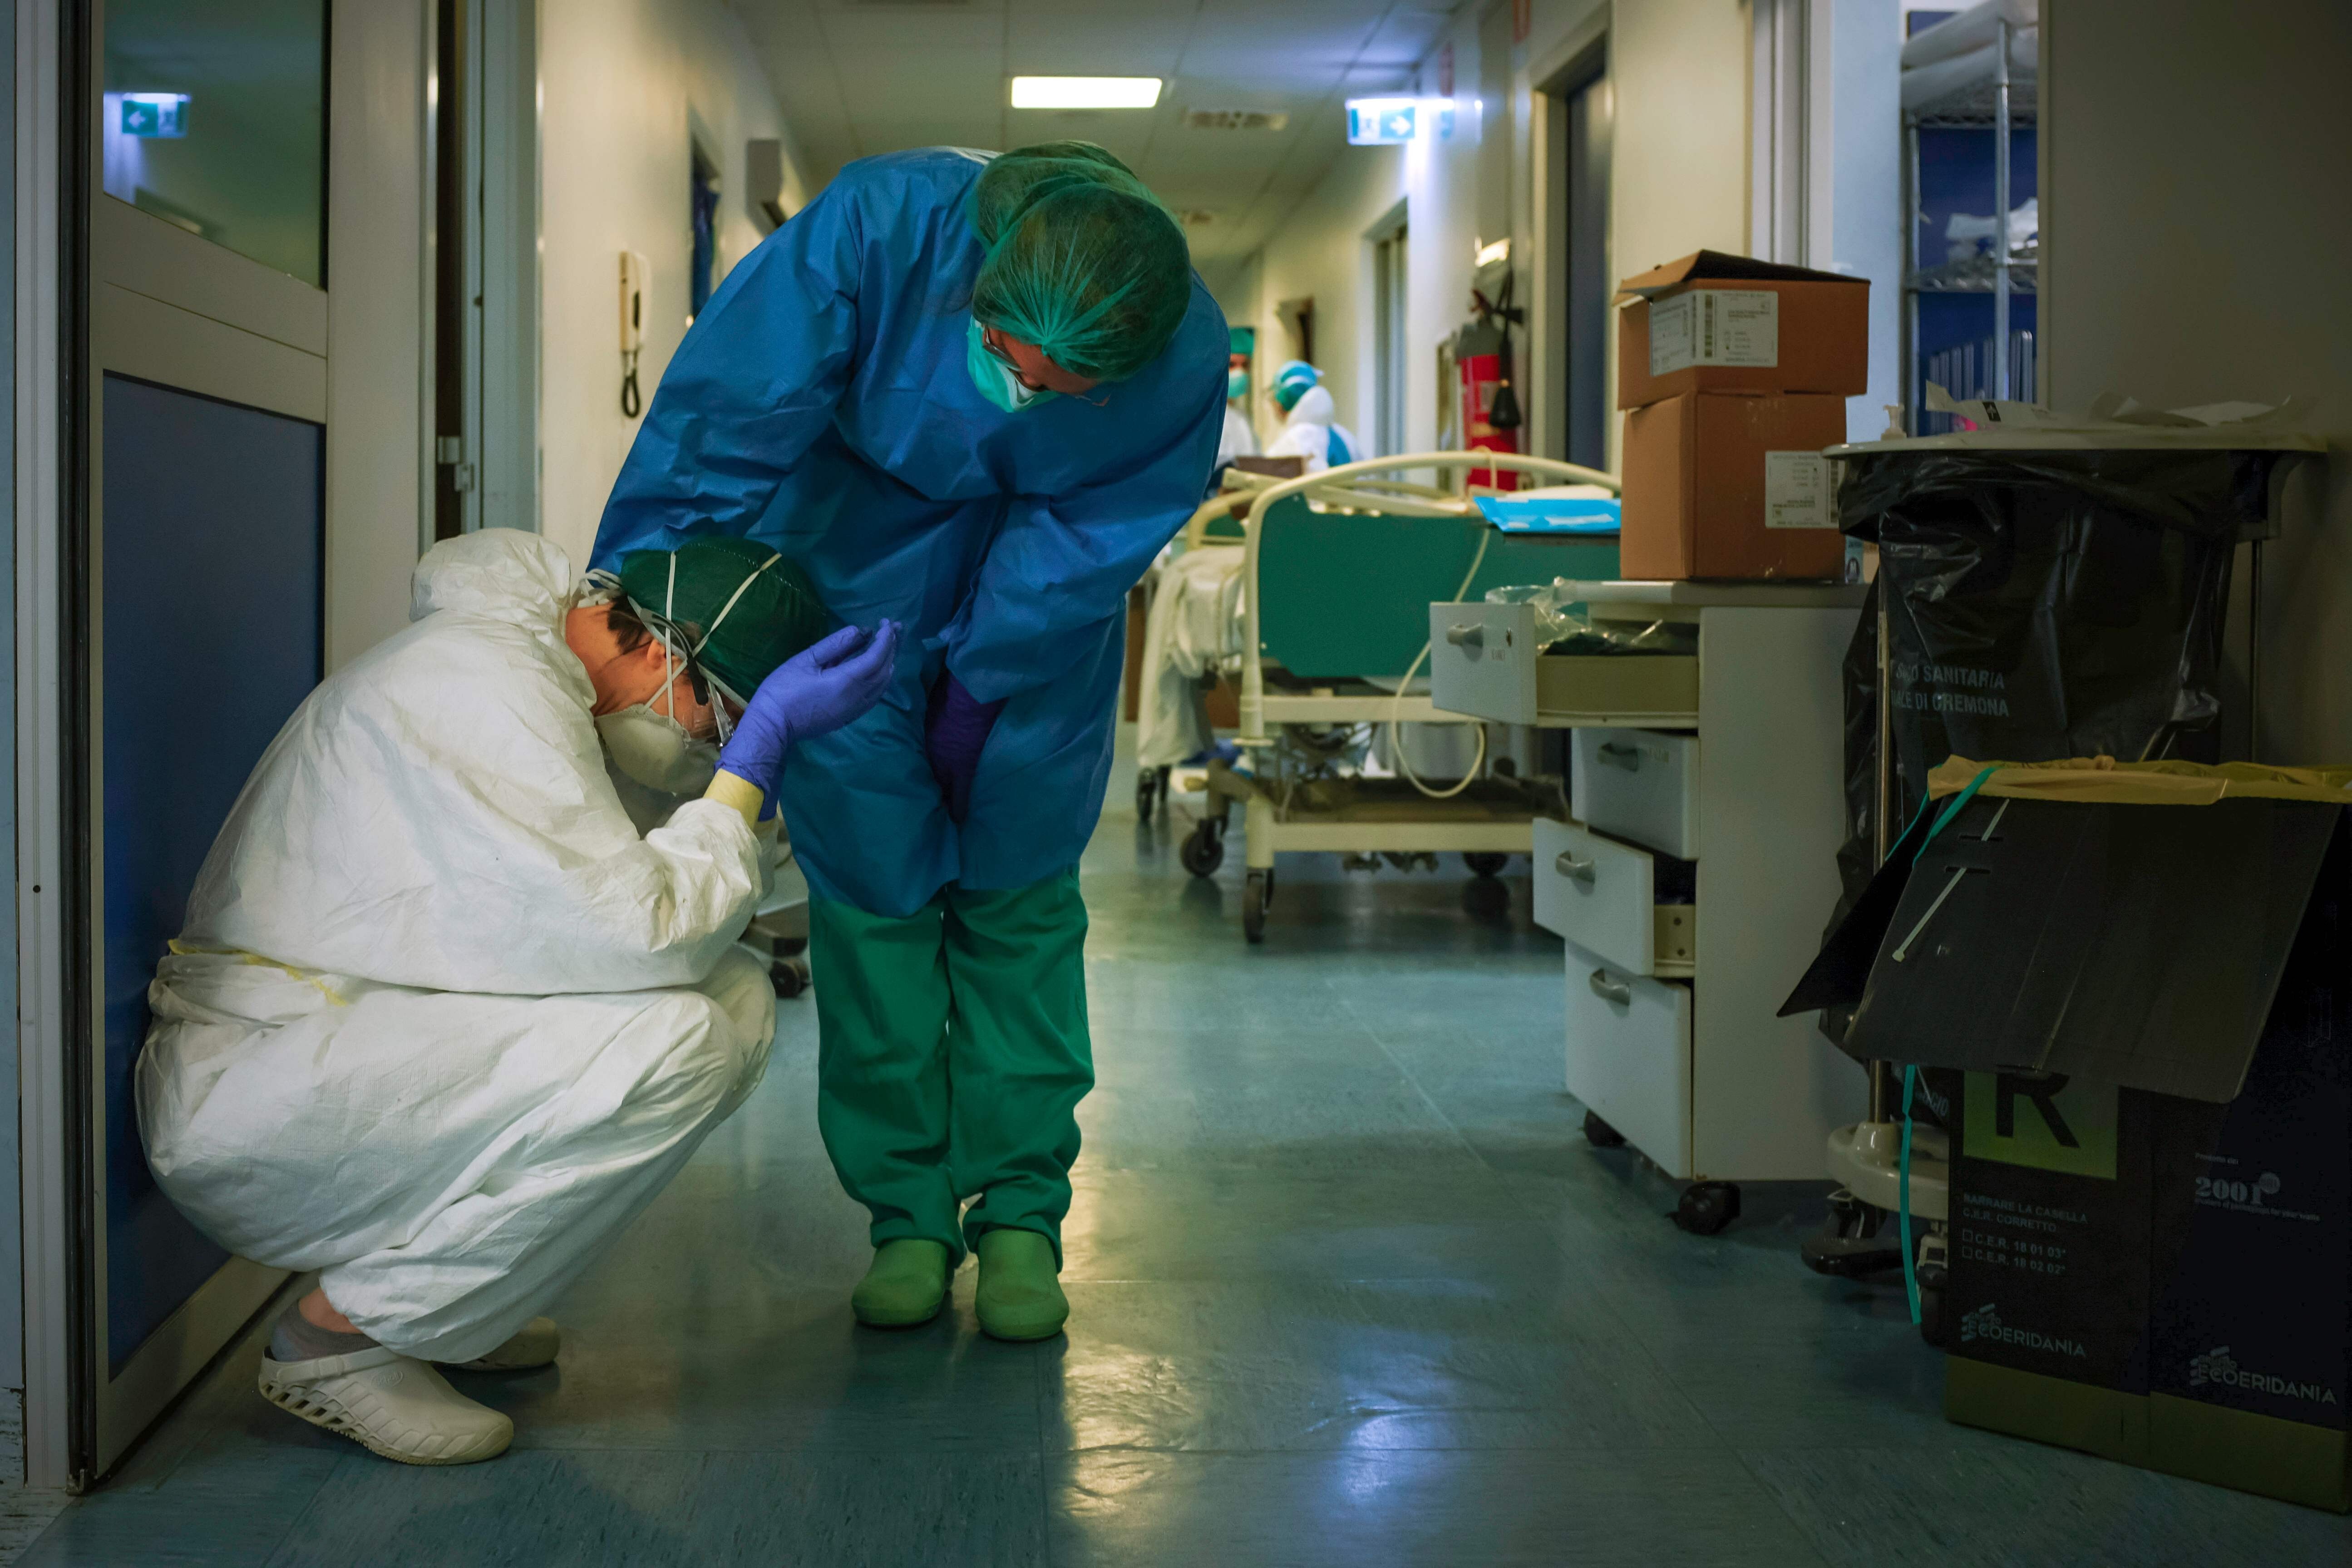 A nurse wearing protective mask and gear comforts another as they change shifts on March 13 at the Cremona hospital, southeast of Milan, during the country’s lockdown aimed at stopping the spread of the Covid-19 pandemic. Photo: AFP